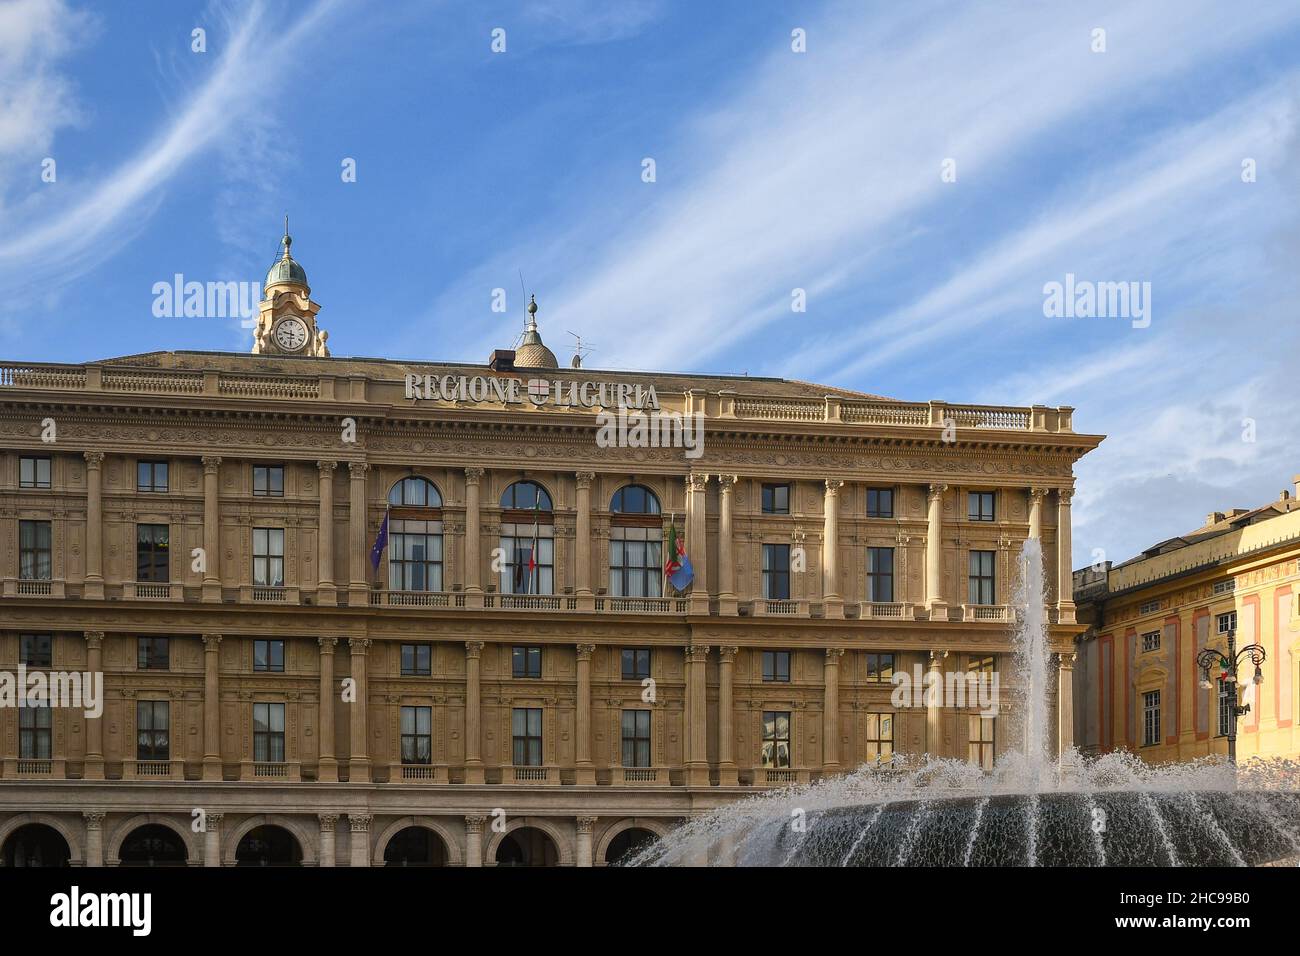 Exterior of the Liguria Region Palace with the gushing fountain of Piazza De Ferrari square in the city centre, Genoa, Liguria, Italy Stock Photo